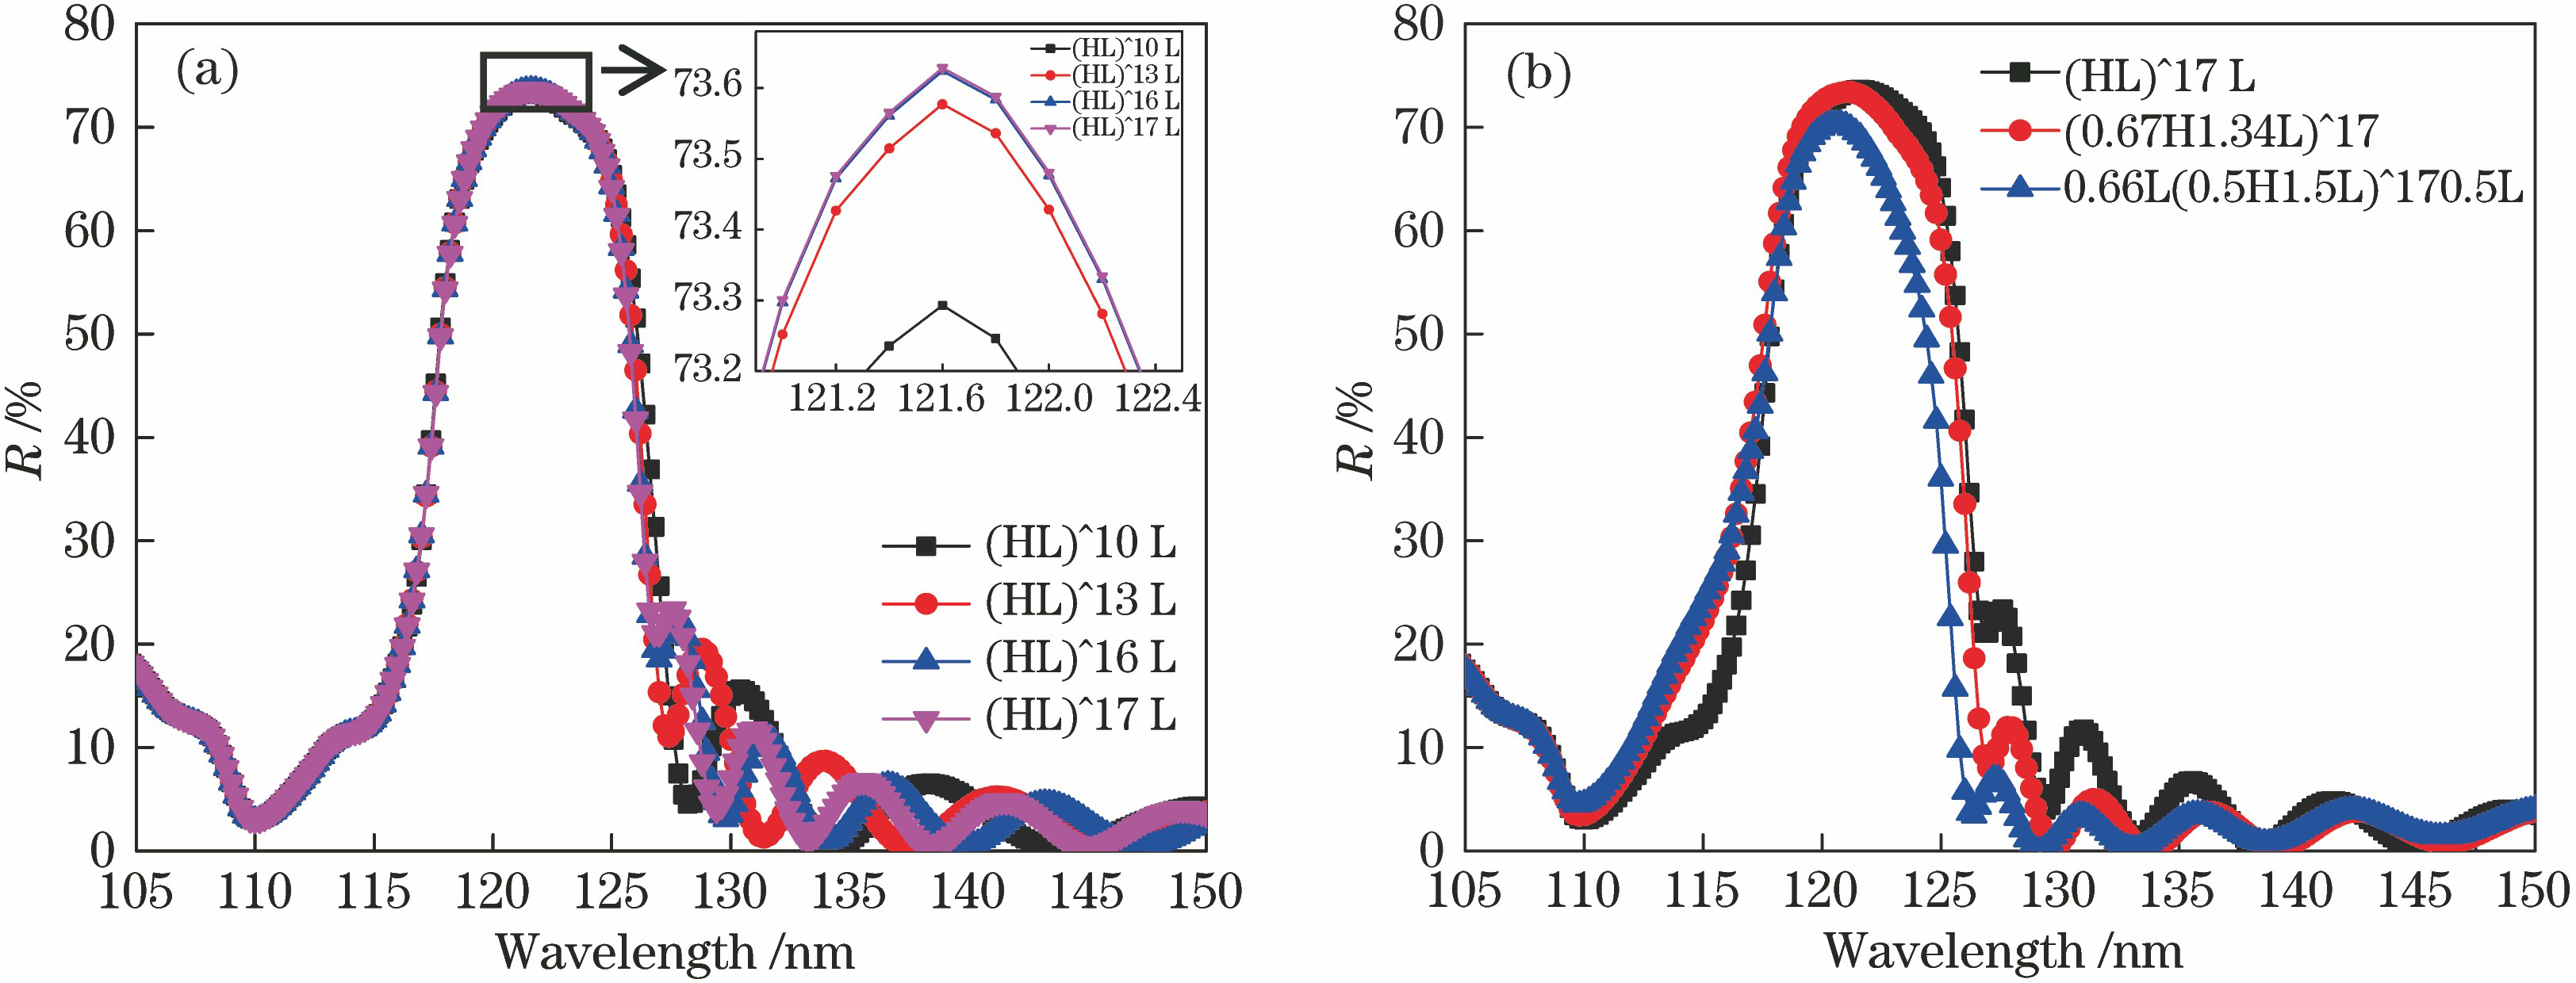 Reflectance at central wavelength of 121.6 nm for LaF3/MgF2 samples under different designs. (a) Different film stacks; (b) different thickness ratios of H to L